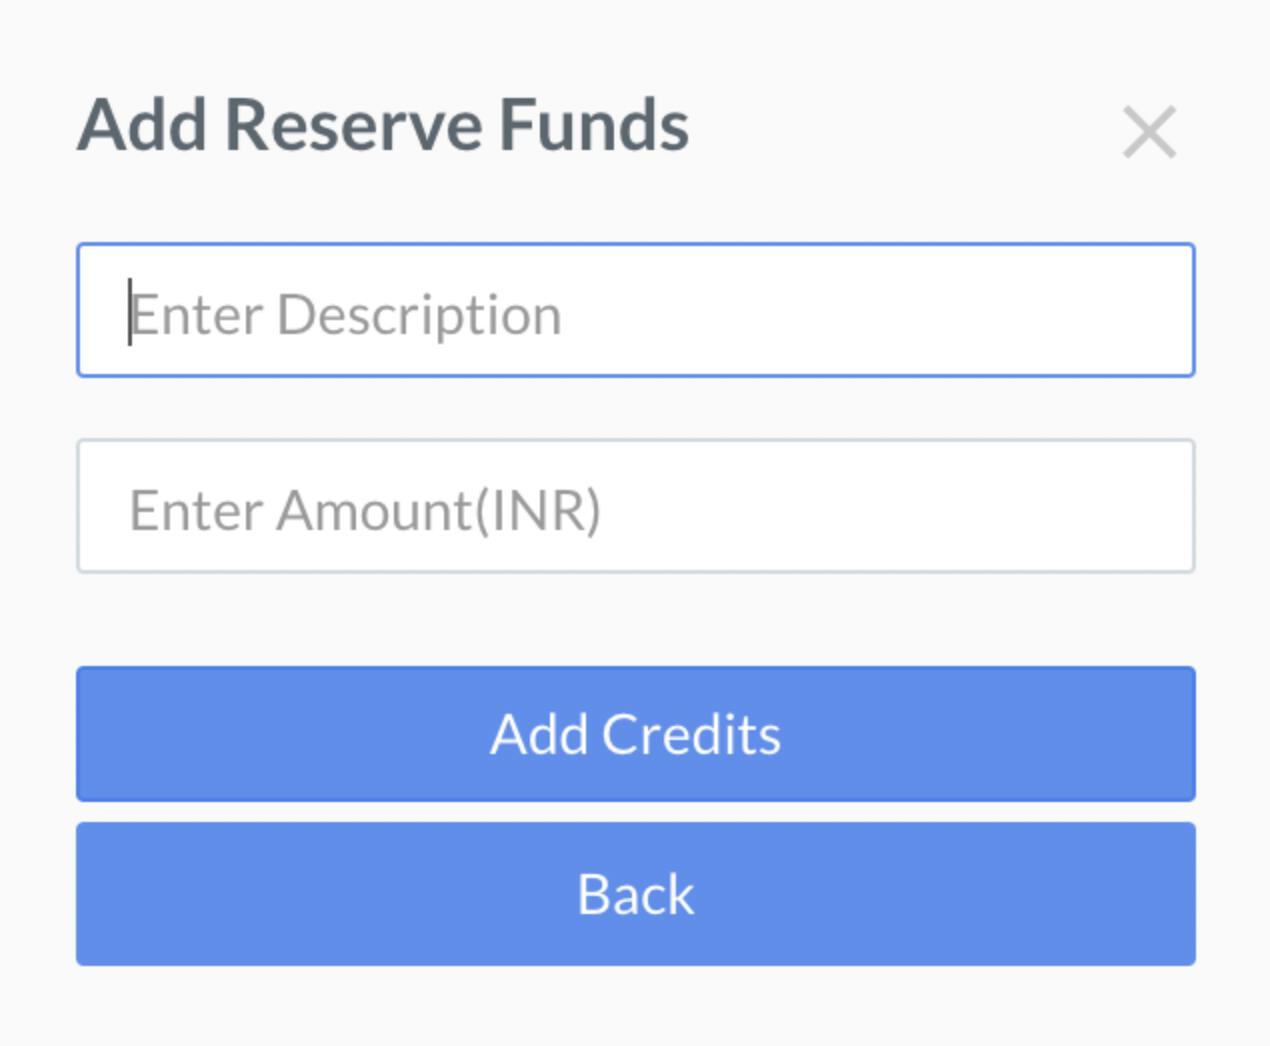 Enter description and amount to add reserve balance funds